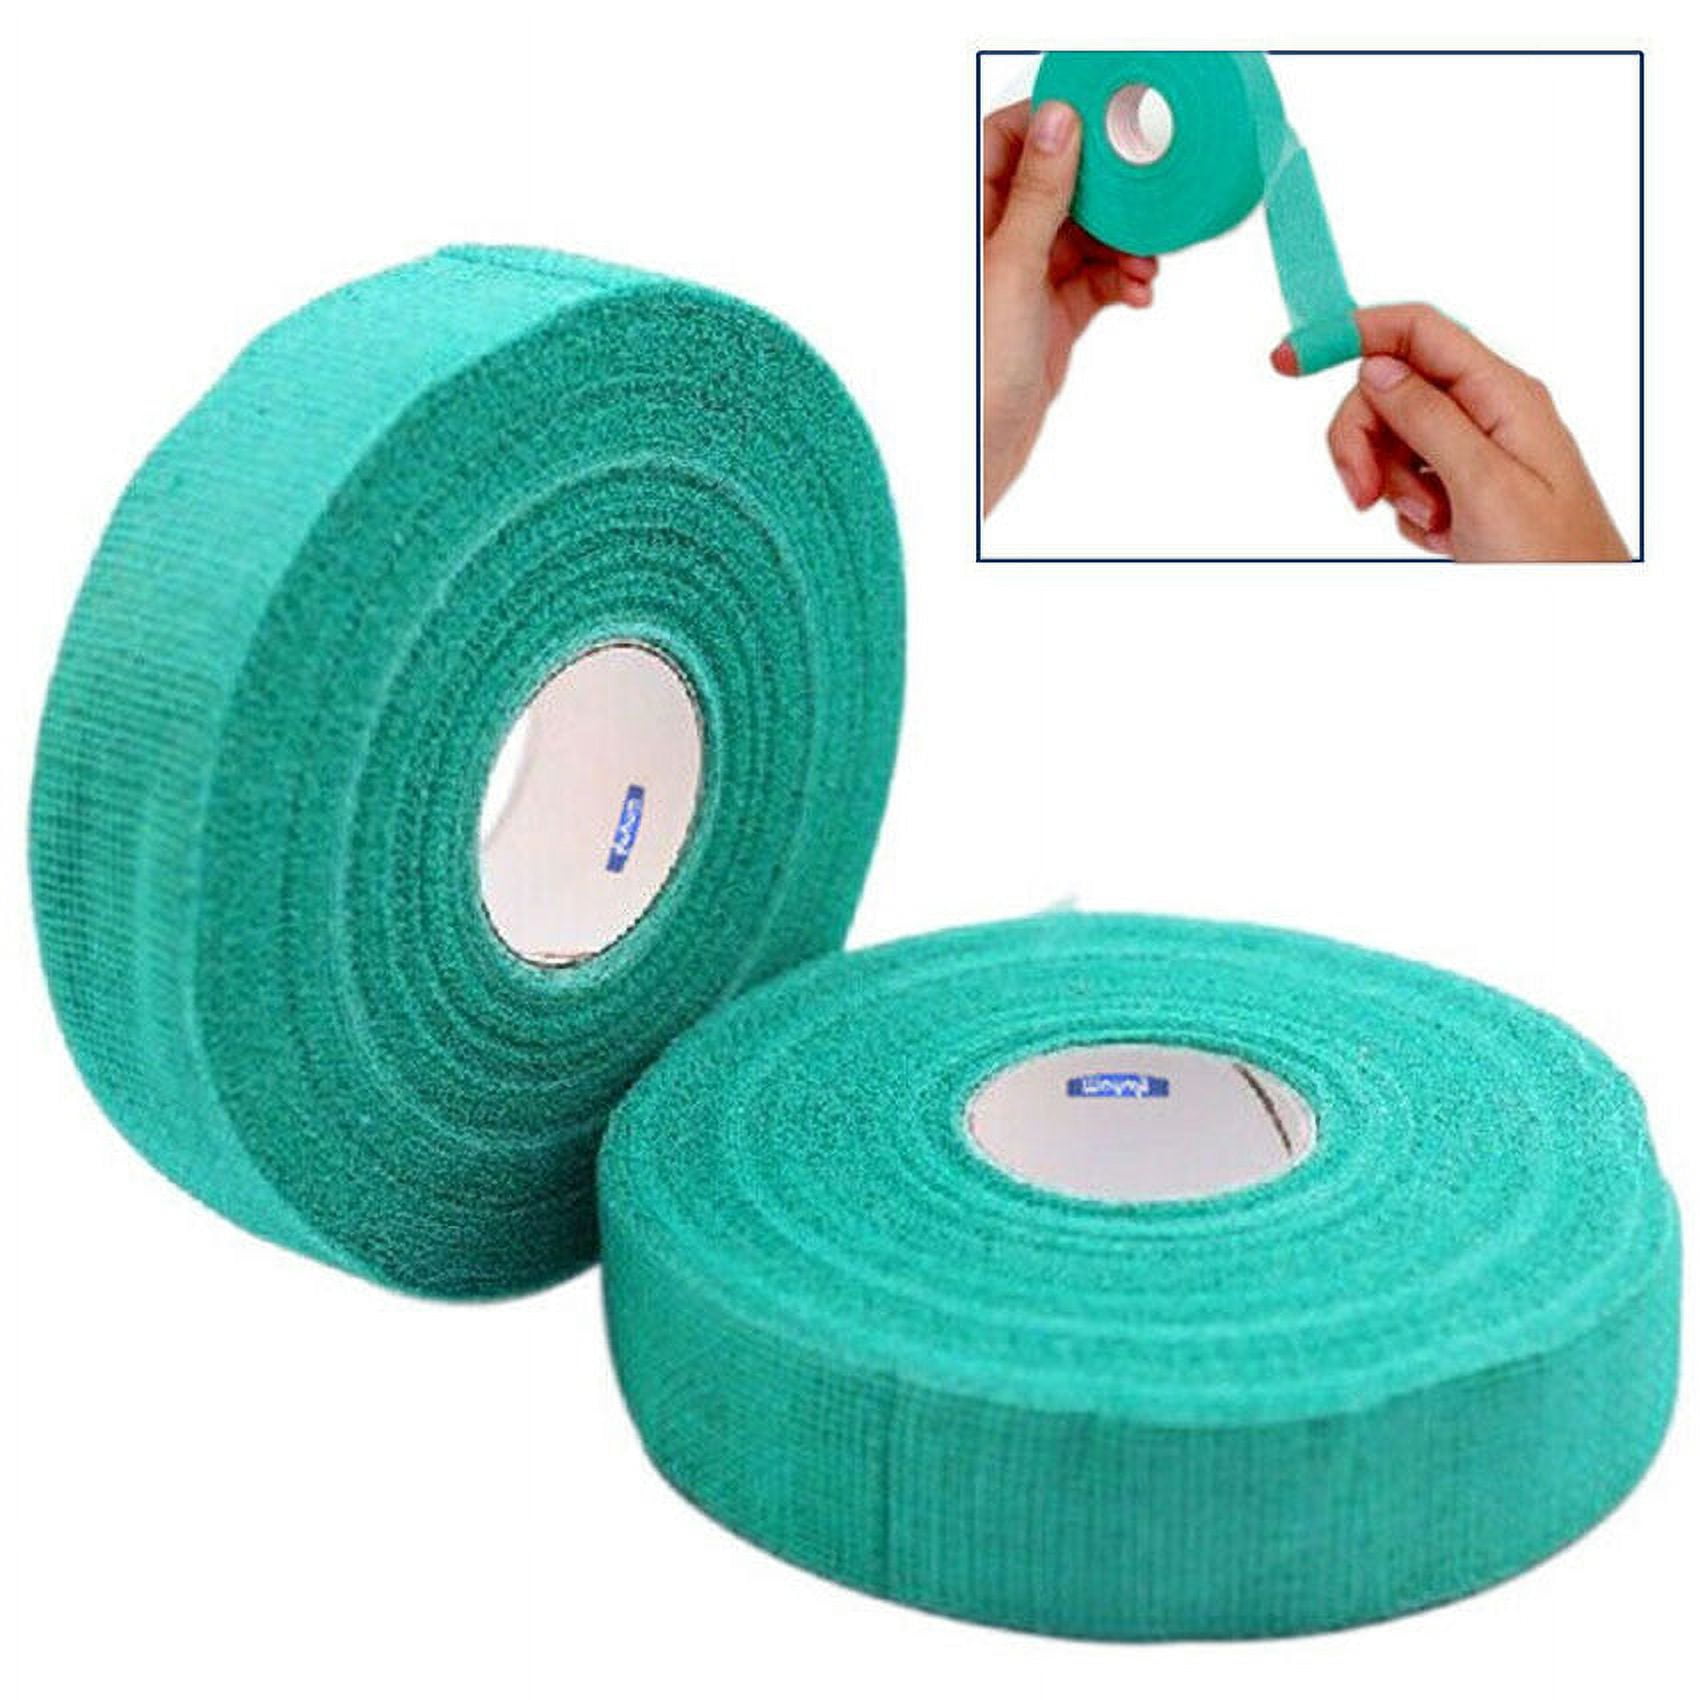 Magnetic Tape Roll with Adhesive Backing - Strip of Peel and Stick